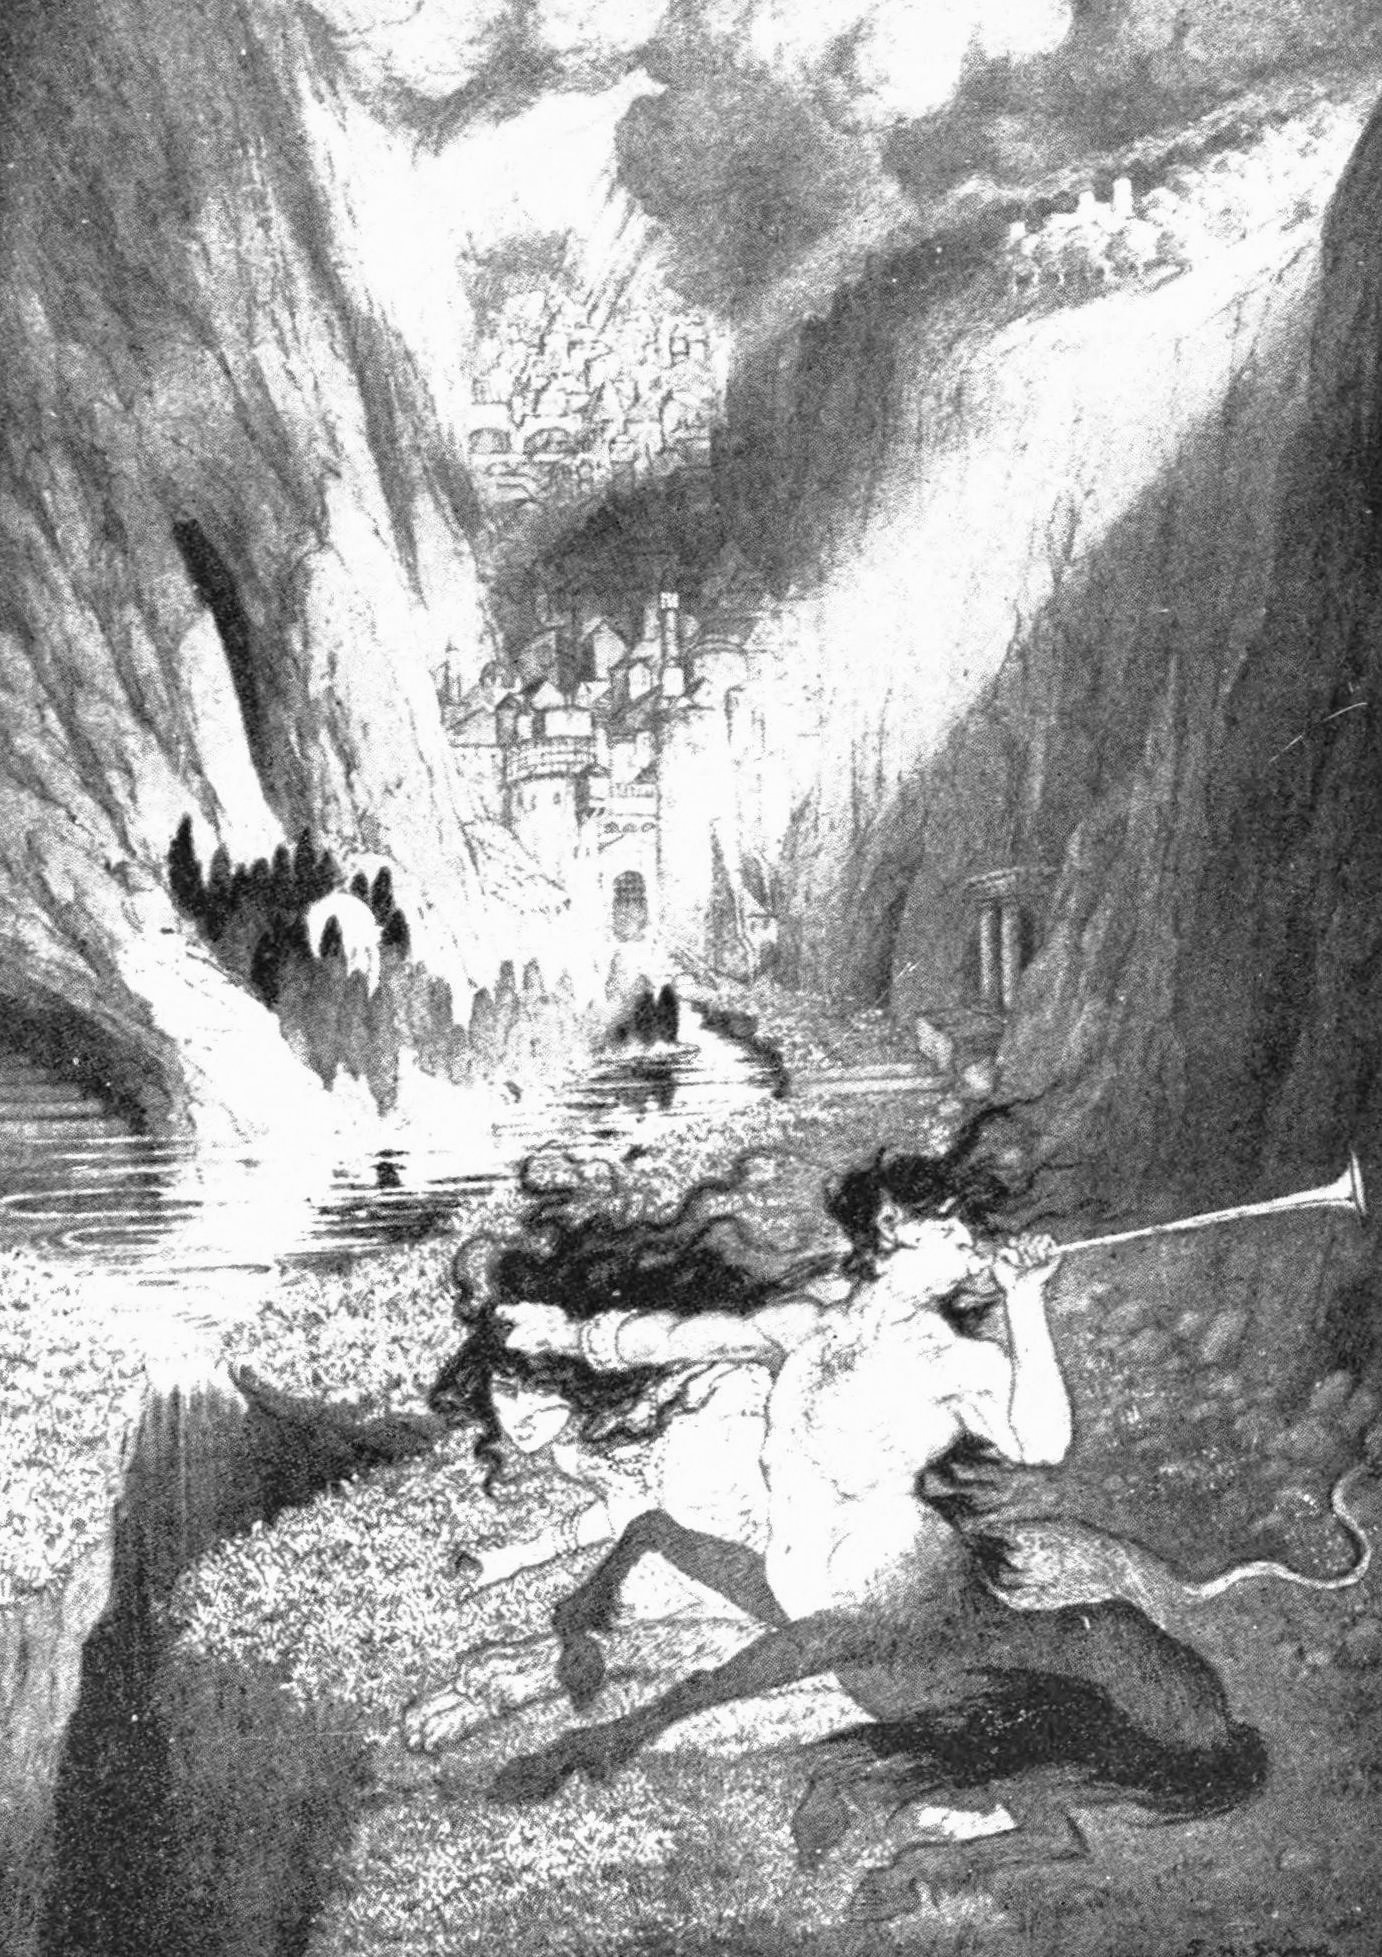 Zretzoola the centaur rears on his hind legs as he blows a horn. He grasps the hair of Sombelenë as she sits beside him. They are in a mountain valley with a castle in the far distance.